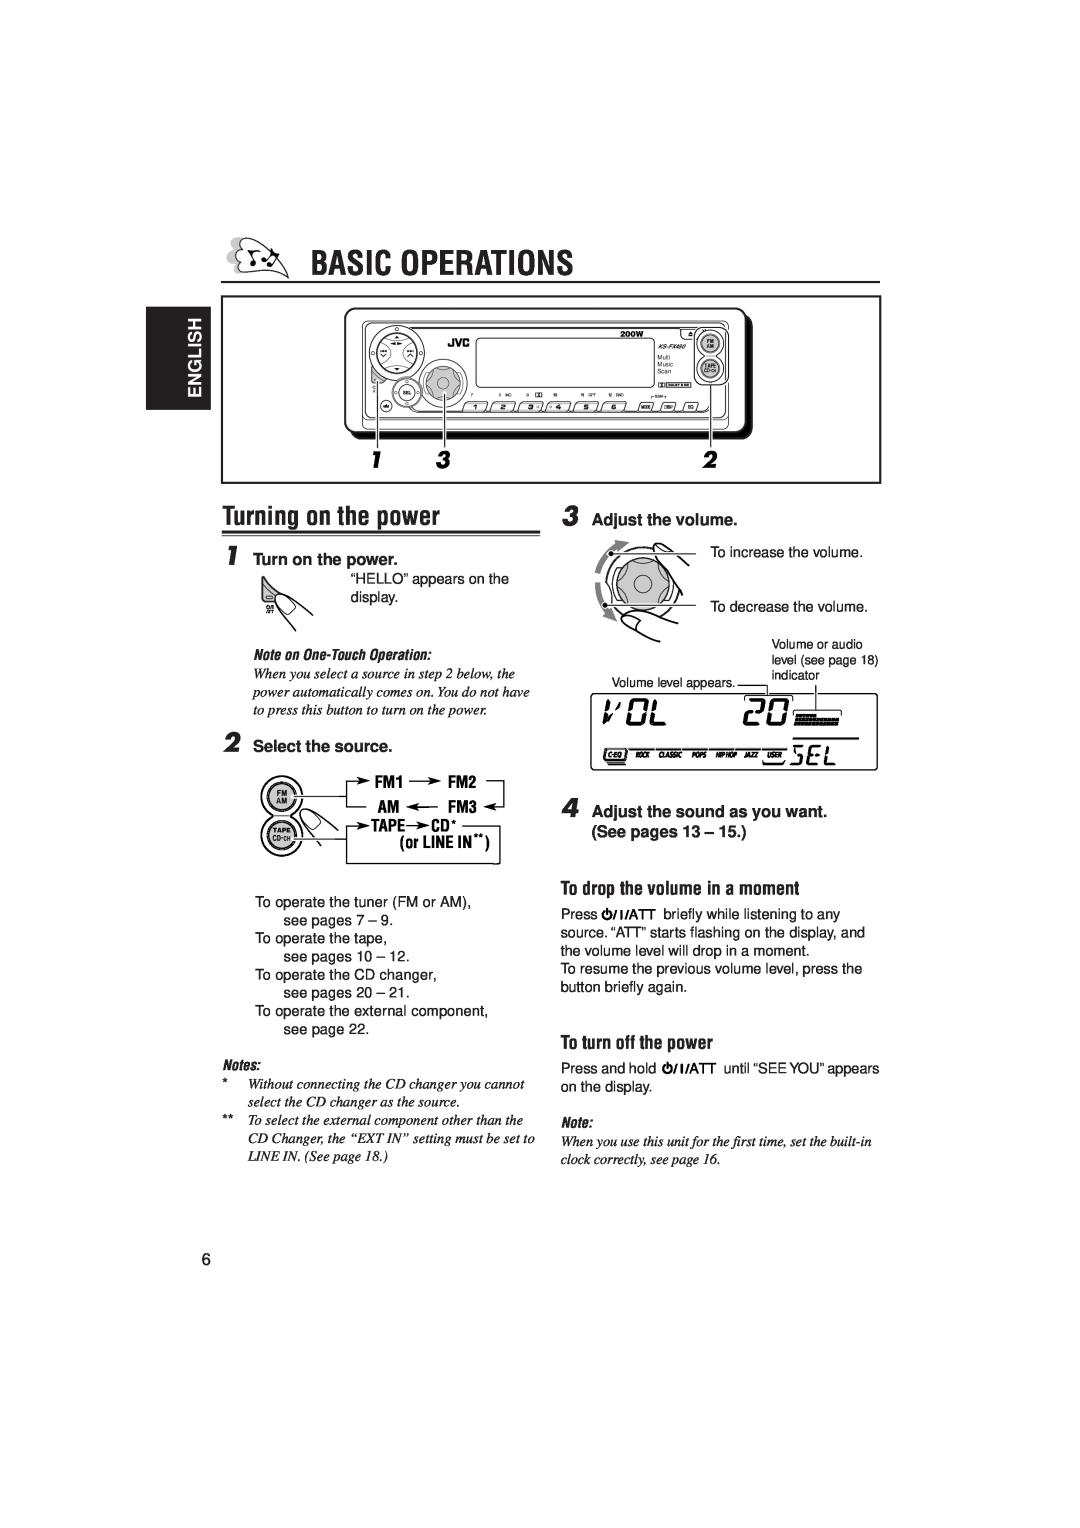 JVC KS-FX480J manual Basic Operations, Turning on the power, To drop the volume in a moment, To turn off the power, English 